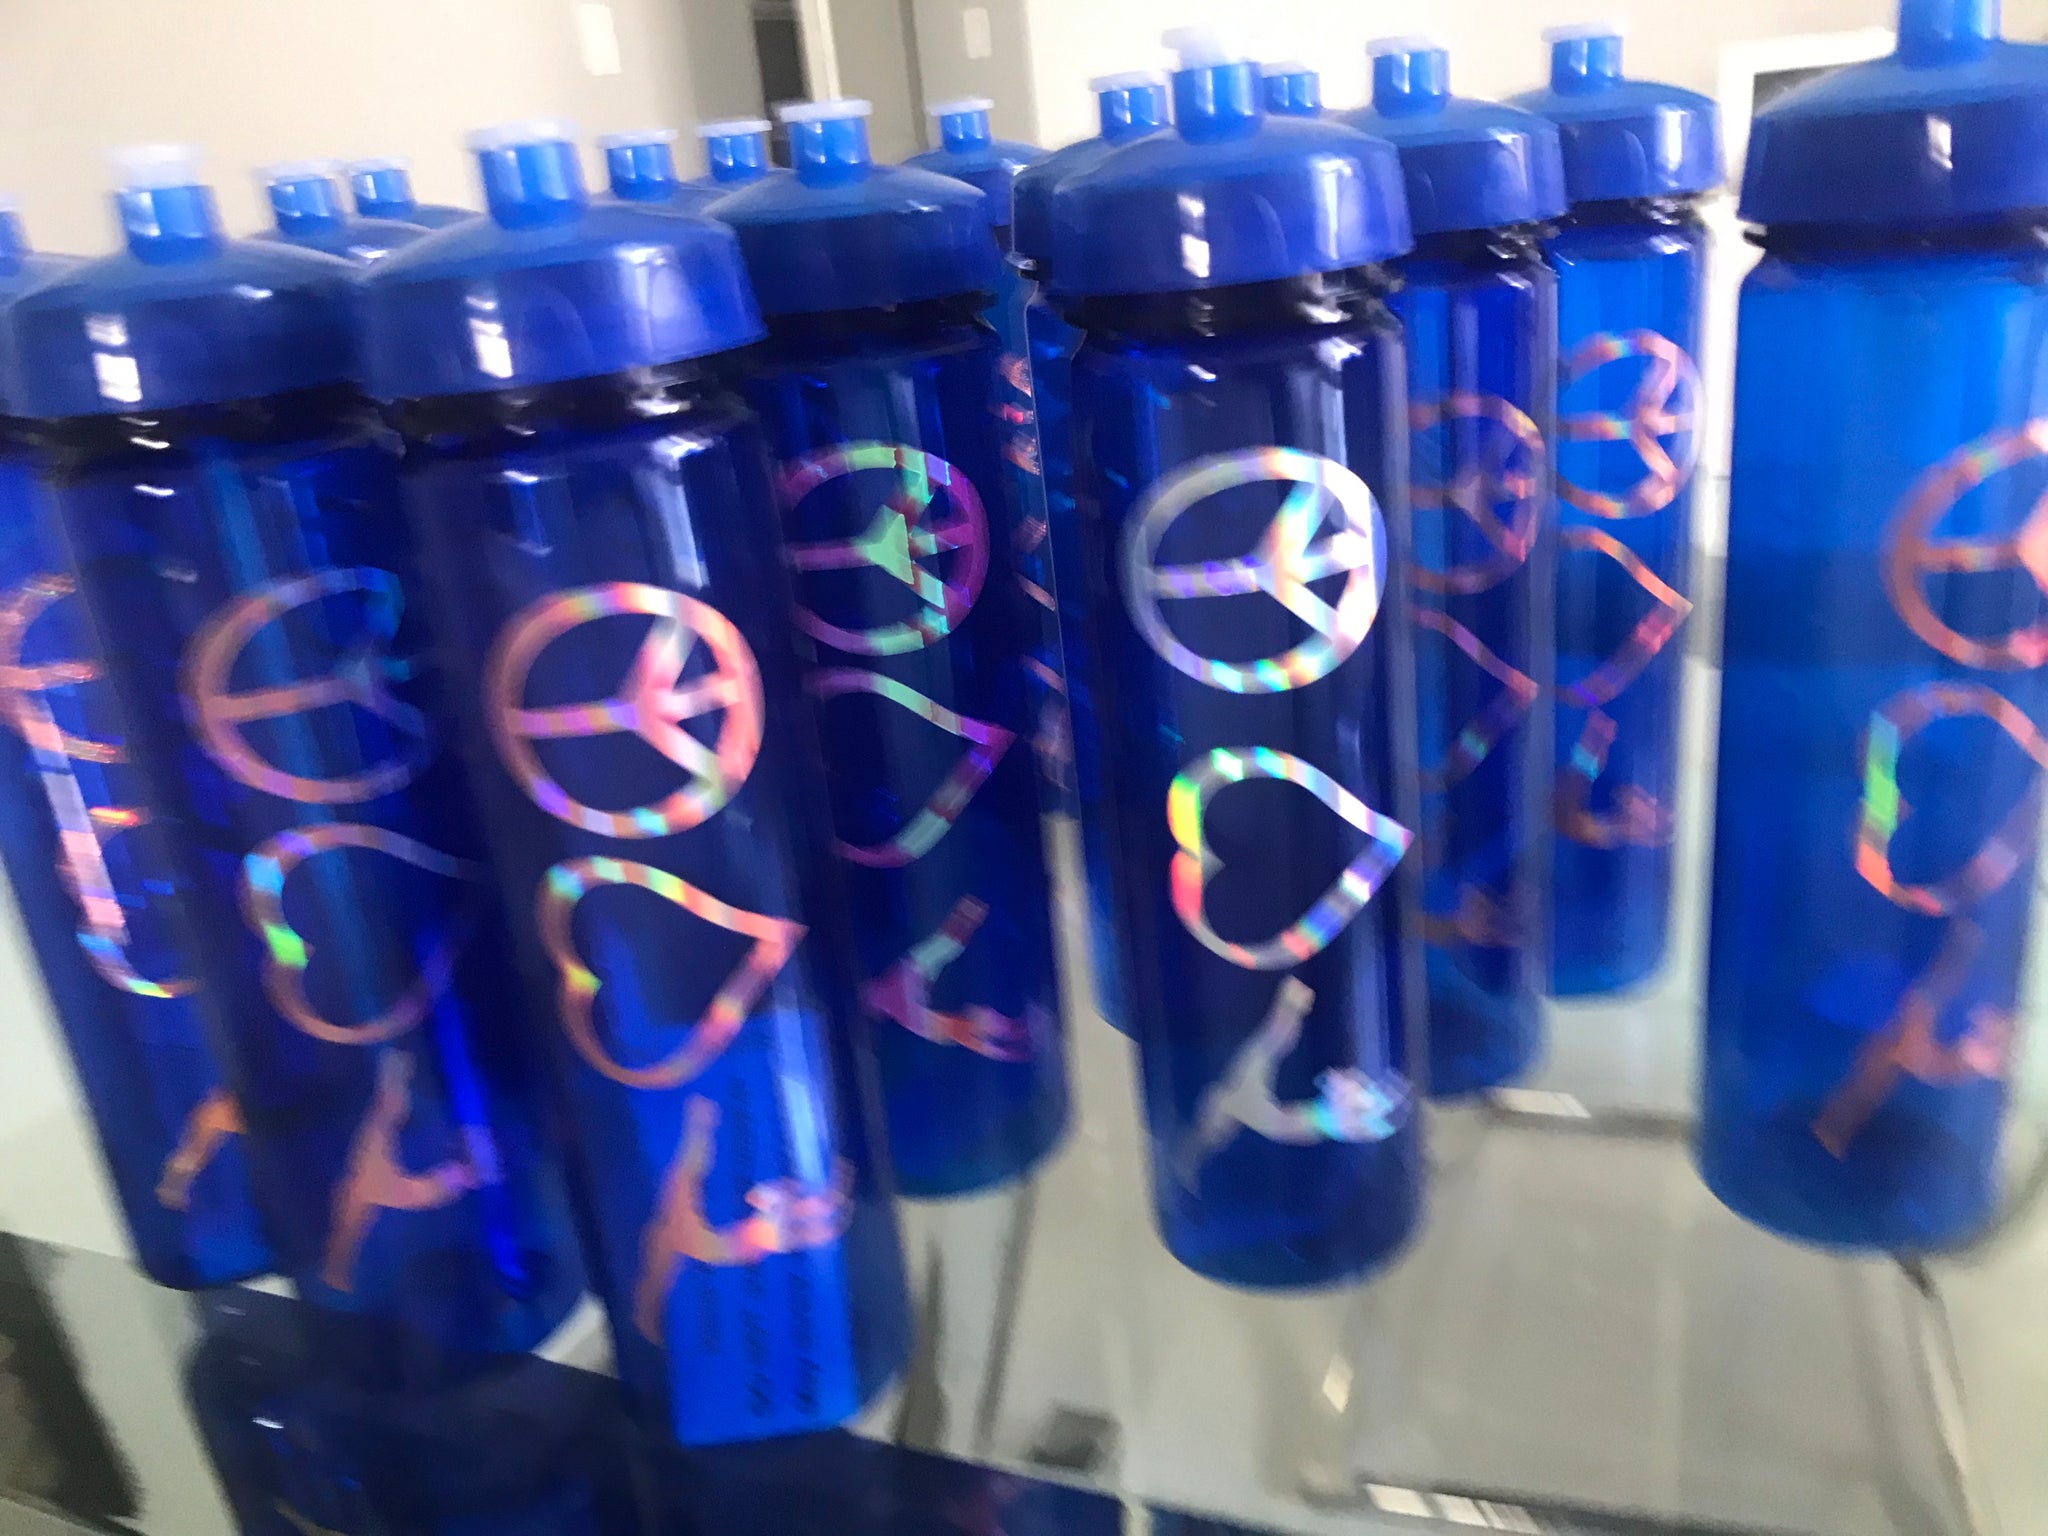 Personalized Plastic Water Bottle, Kids Sports Bottle, White Water Bottle,  Sports Themed Party Favors,football Baseball Soccer Party 